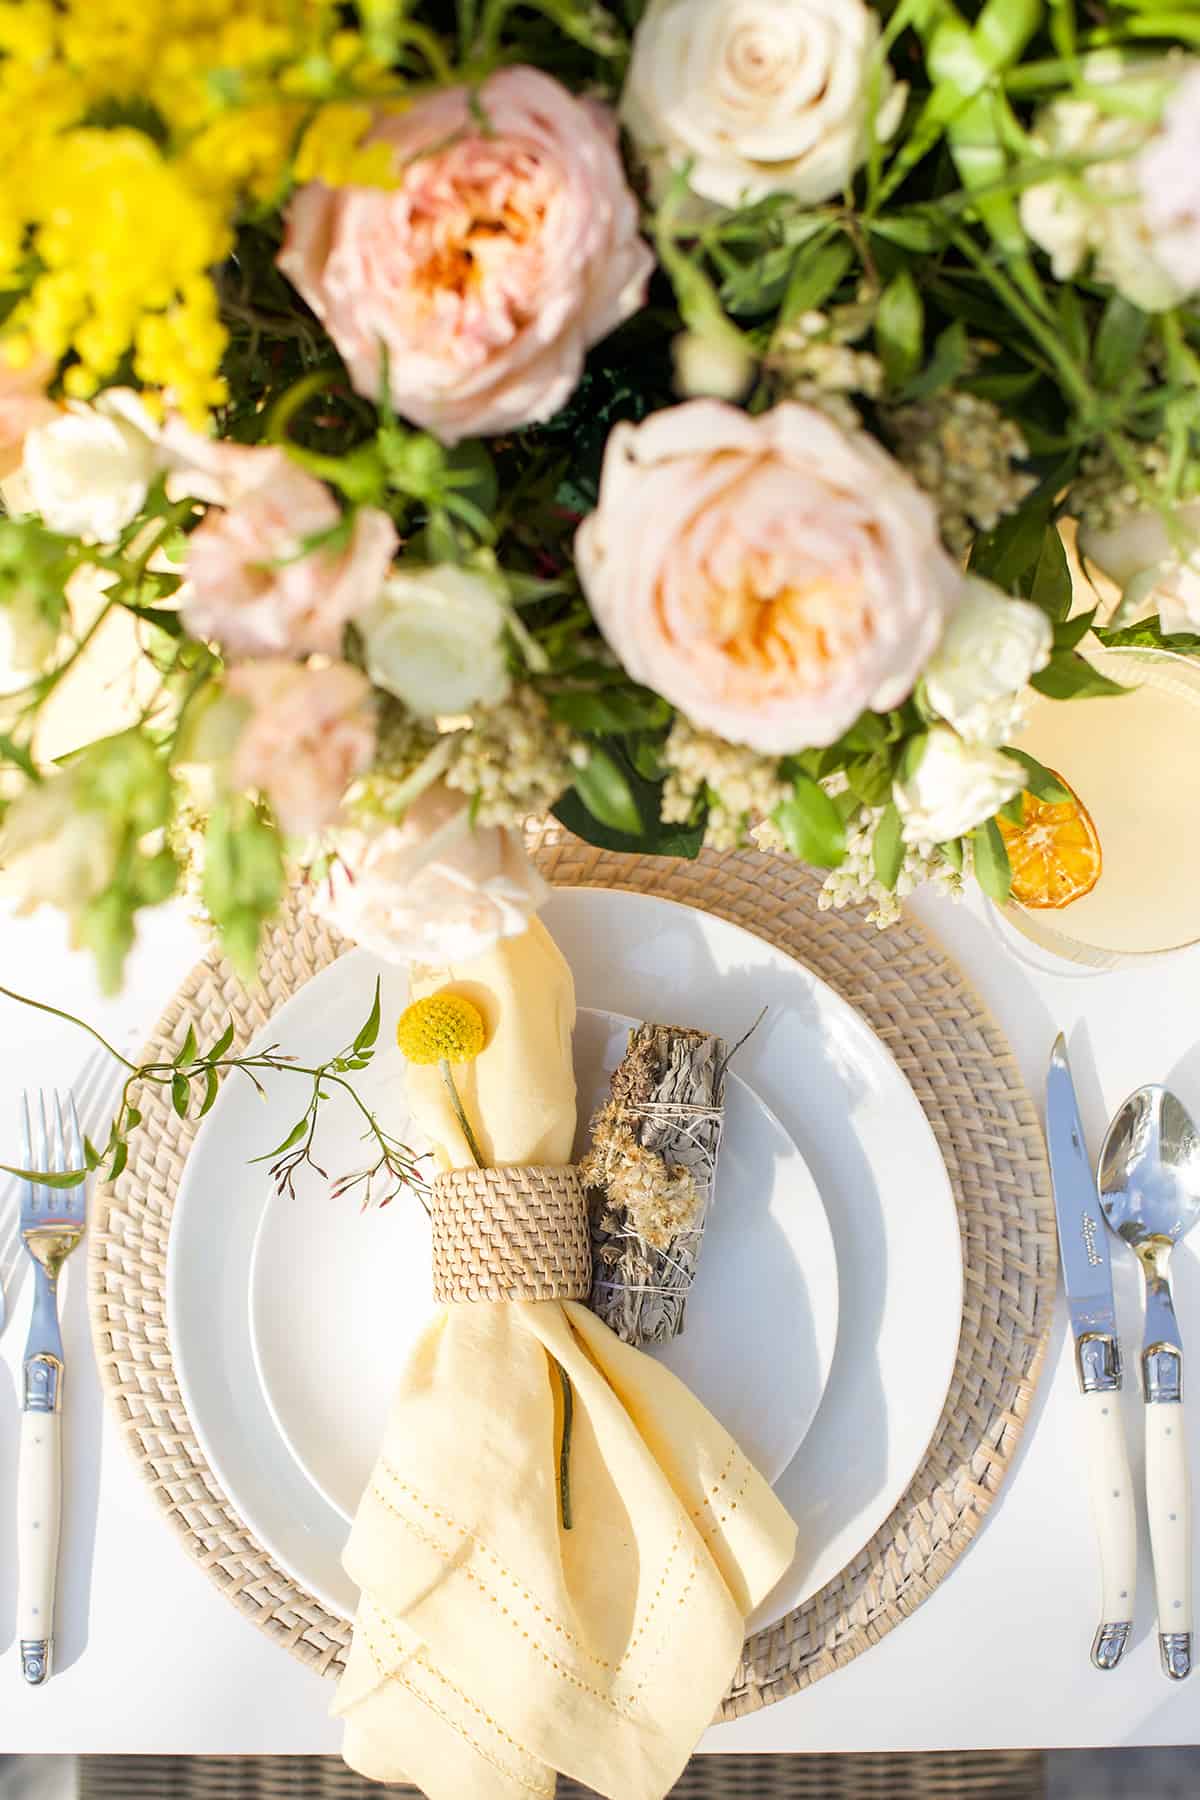 Table setting with yellow napkins, flowers and a properly set table.